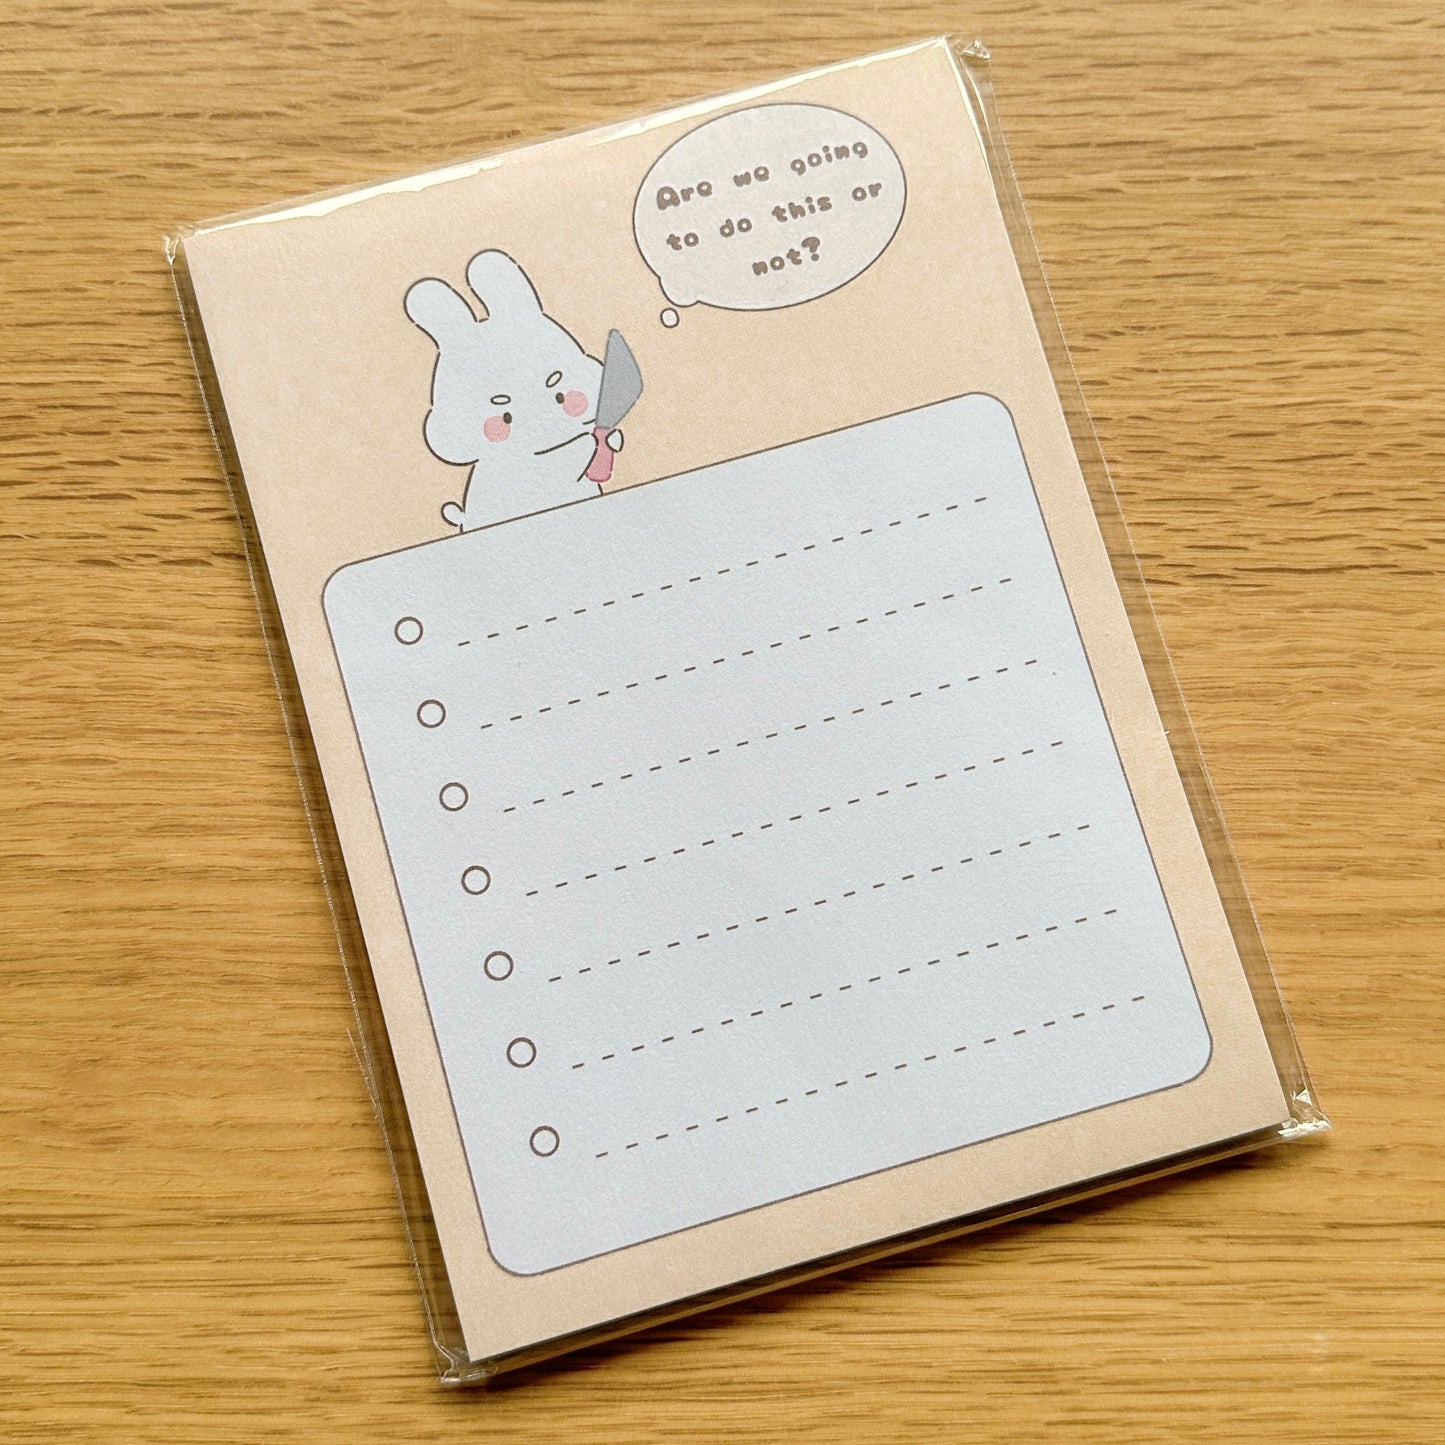 “Are we going to do this or not?” Bunny A6 Notepad